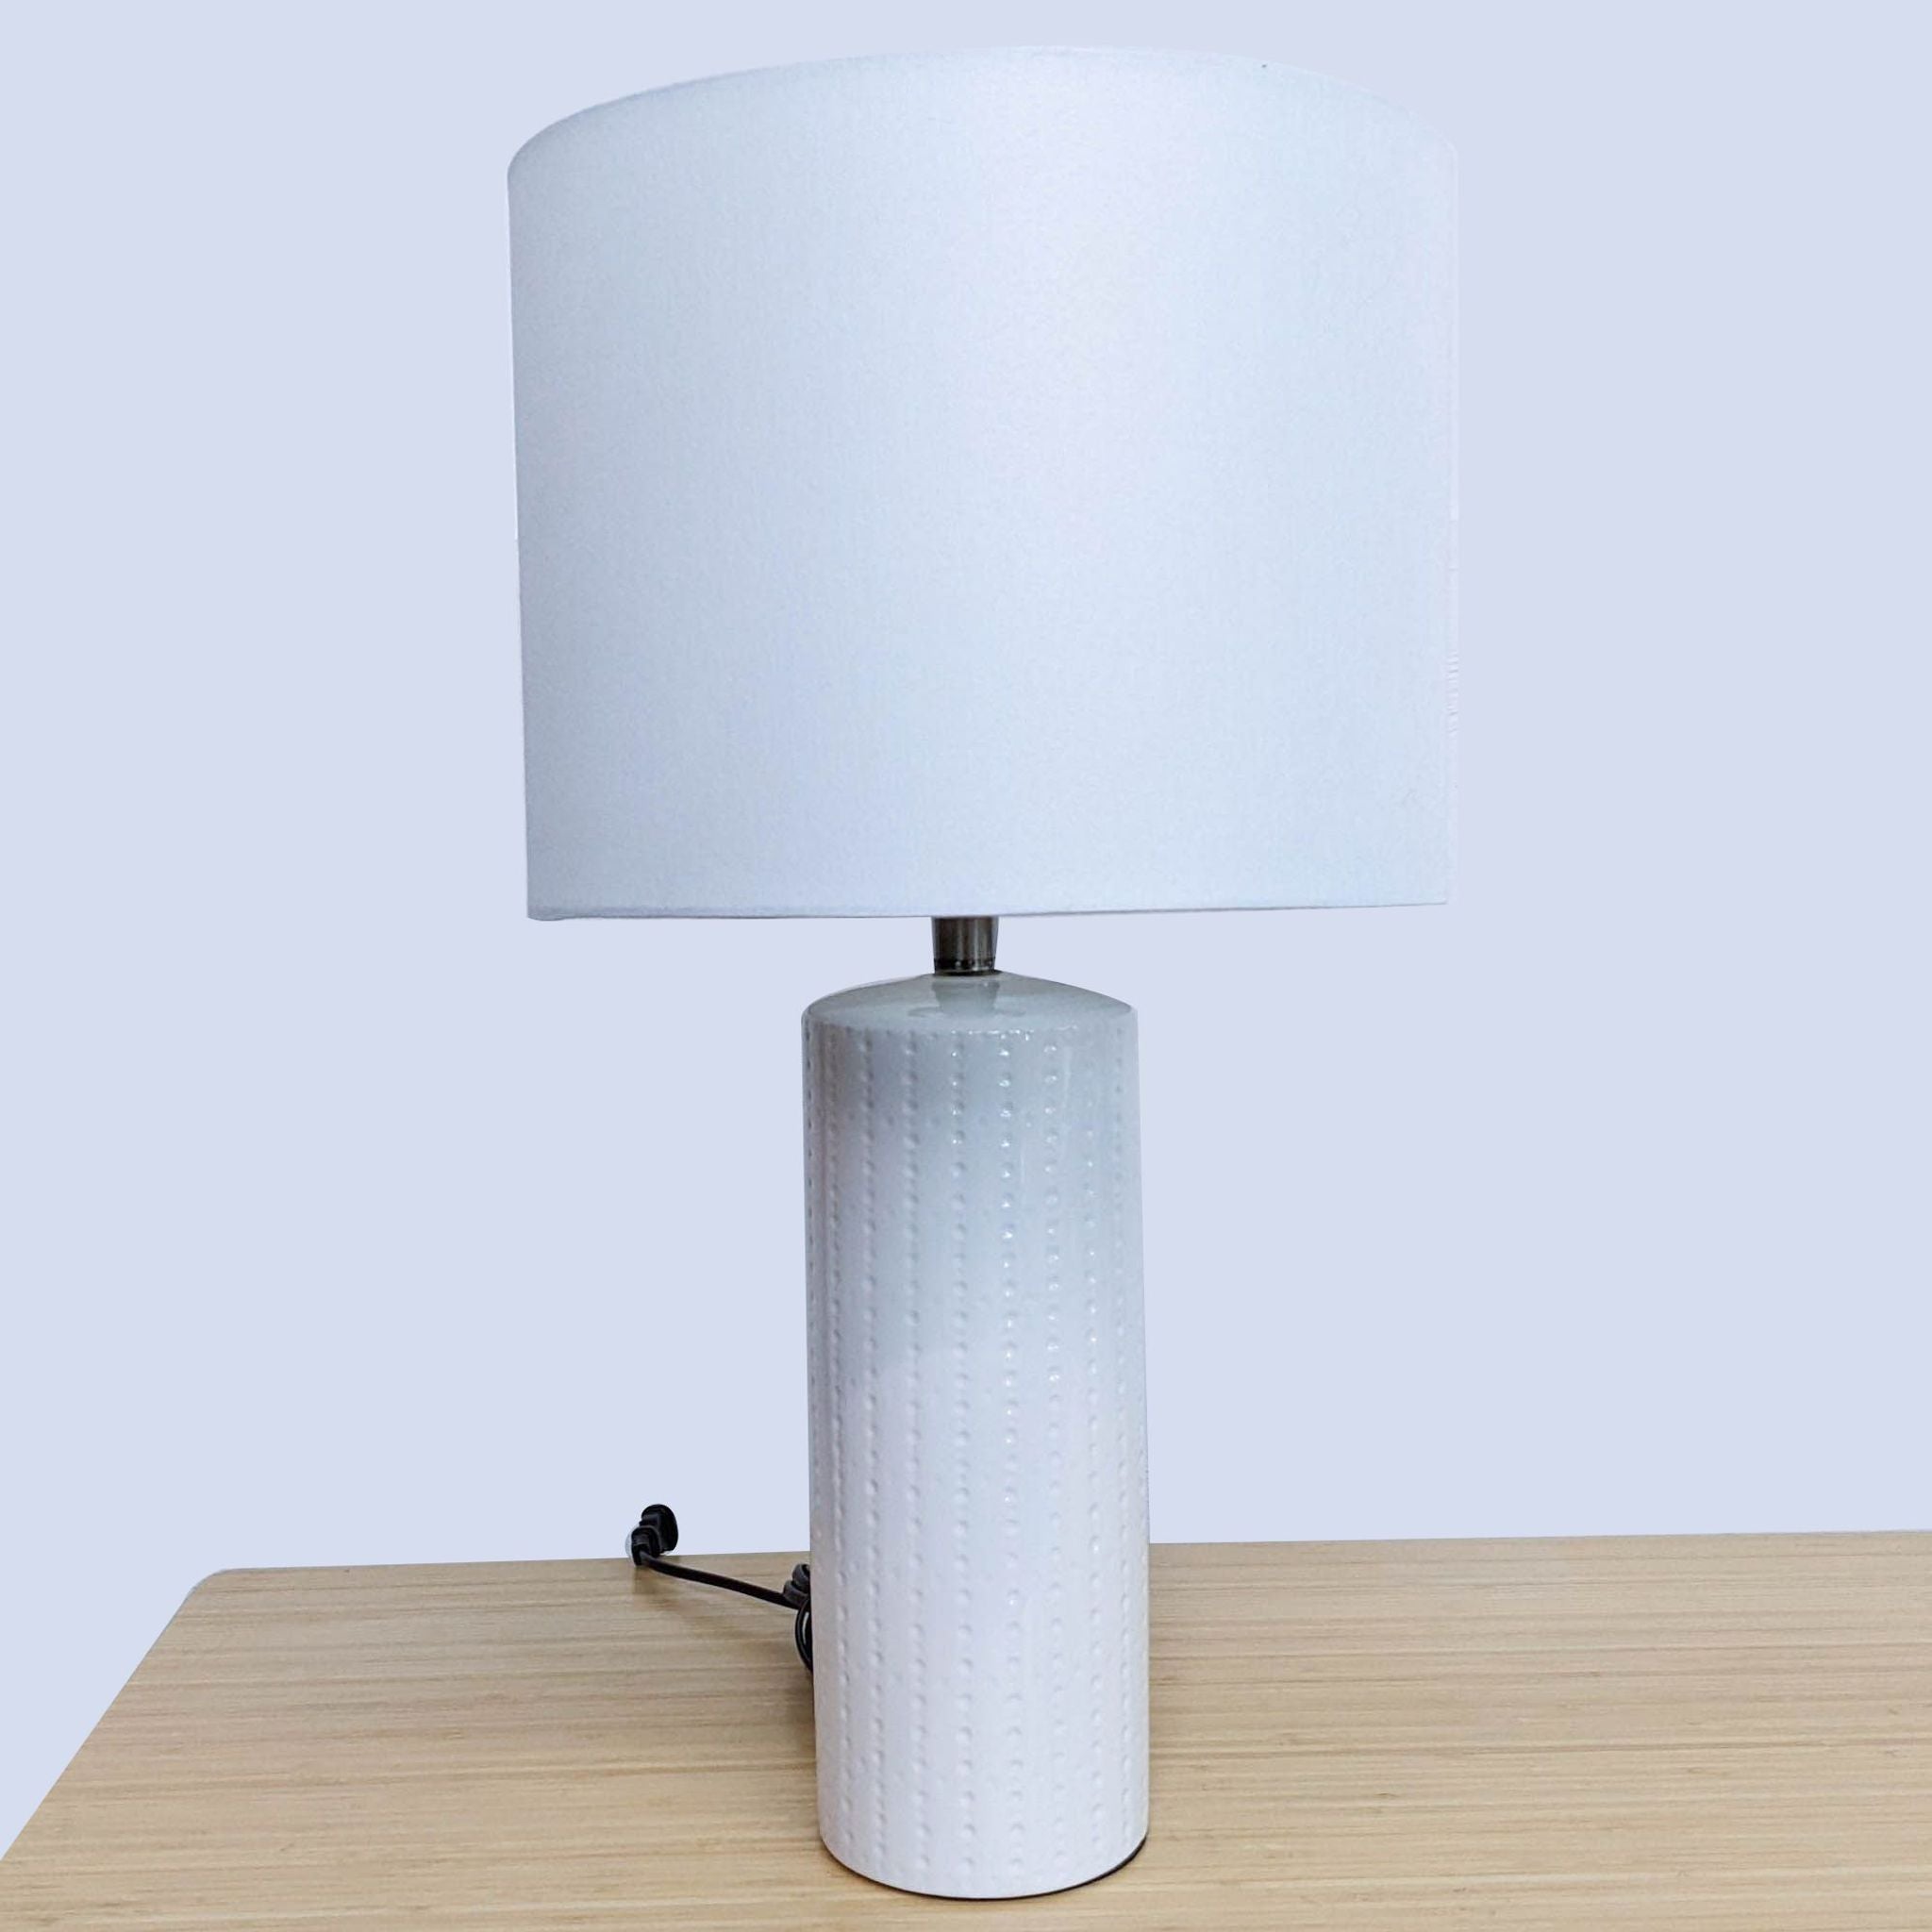 Reperch brand table lamp with a cylindrical base and a white fabric shade on a wooden surface.